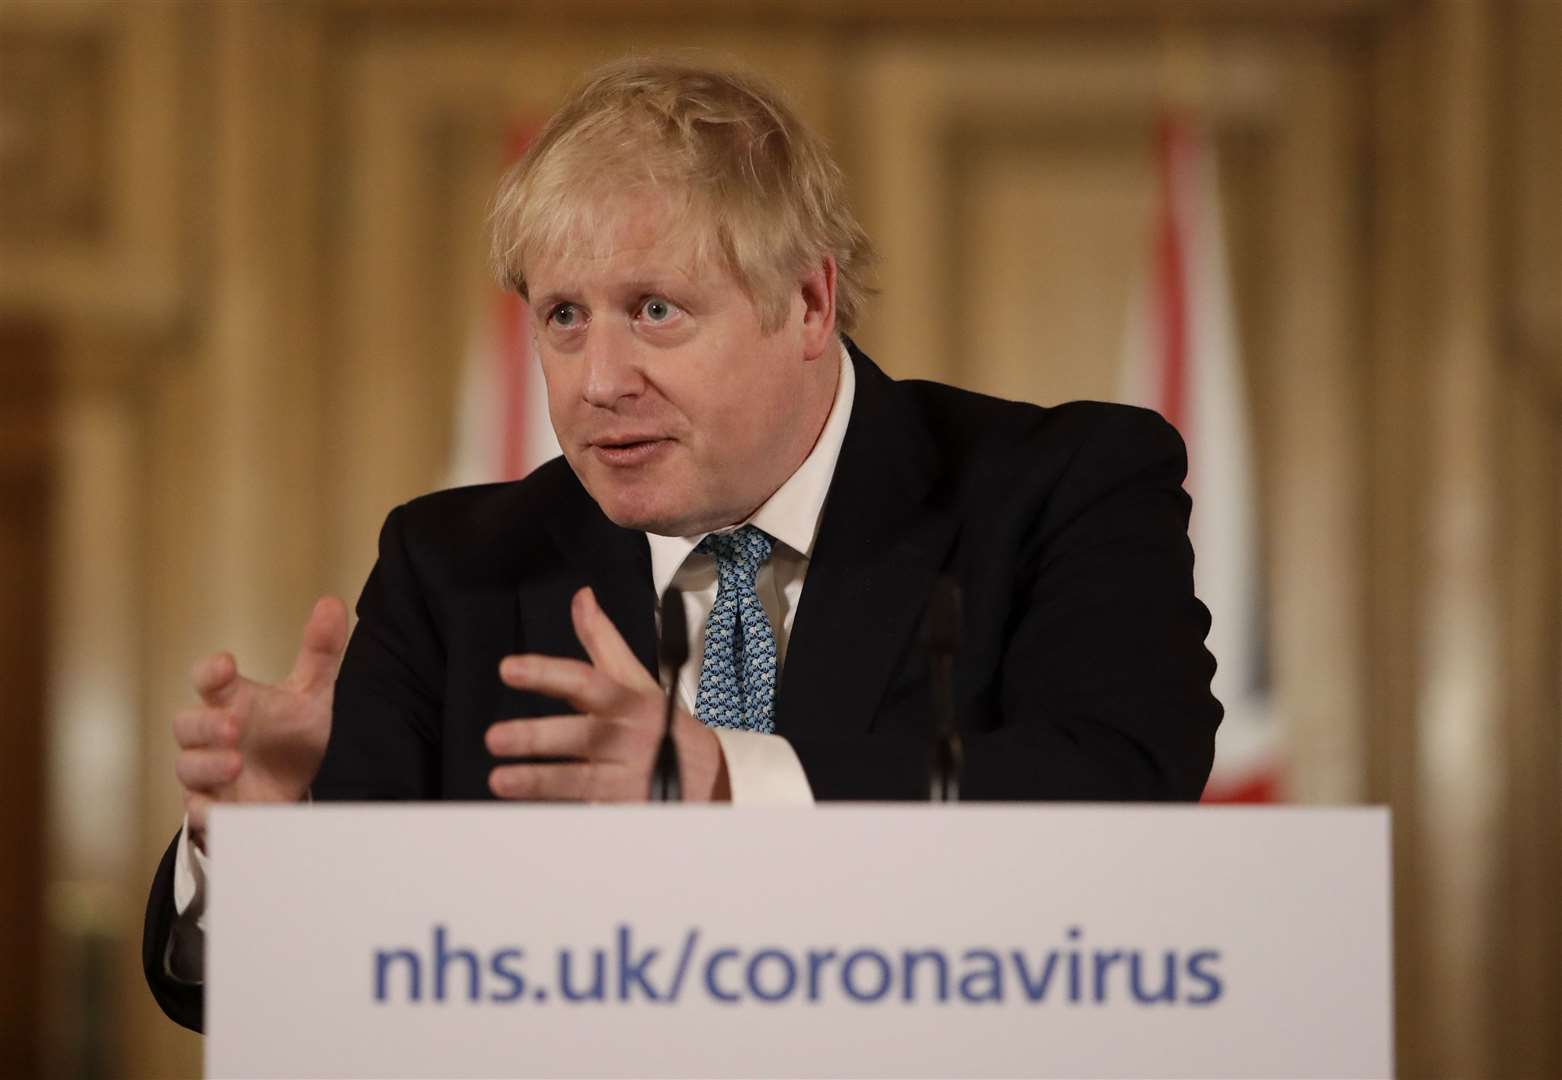 Prime Minister Boris Johnson speaking at a media briefing in Downing Street